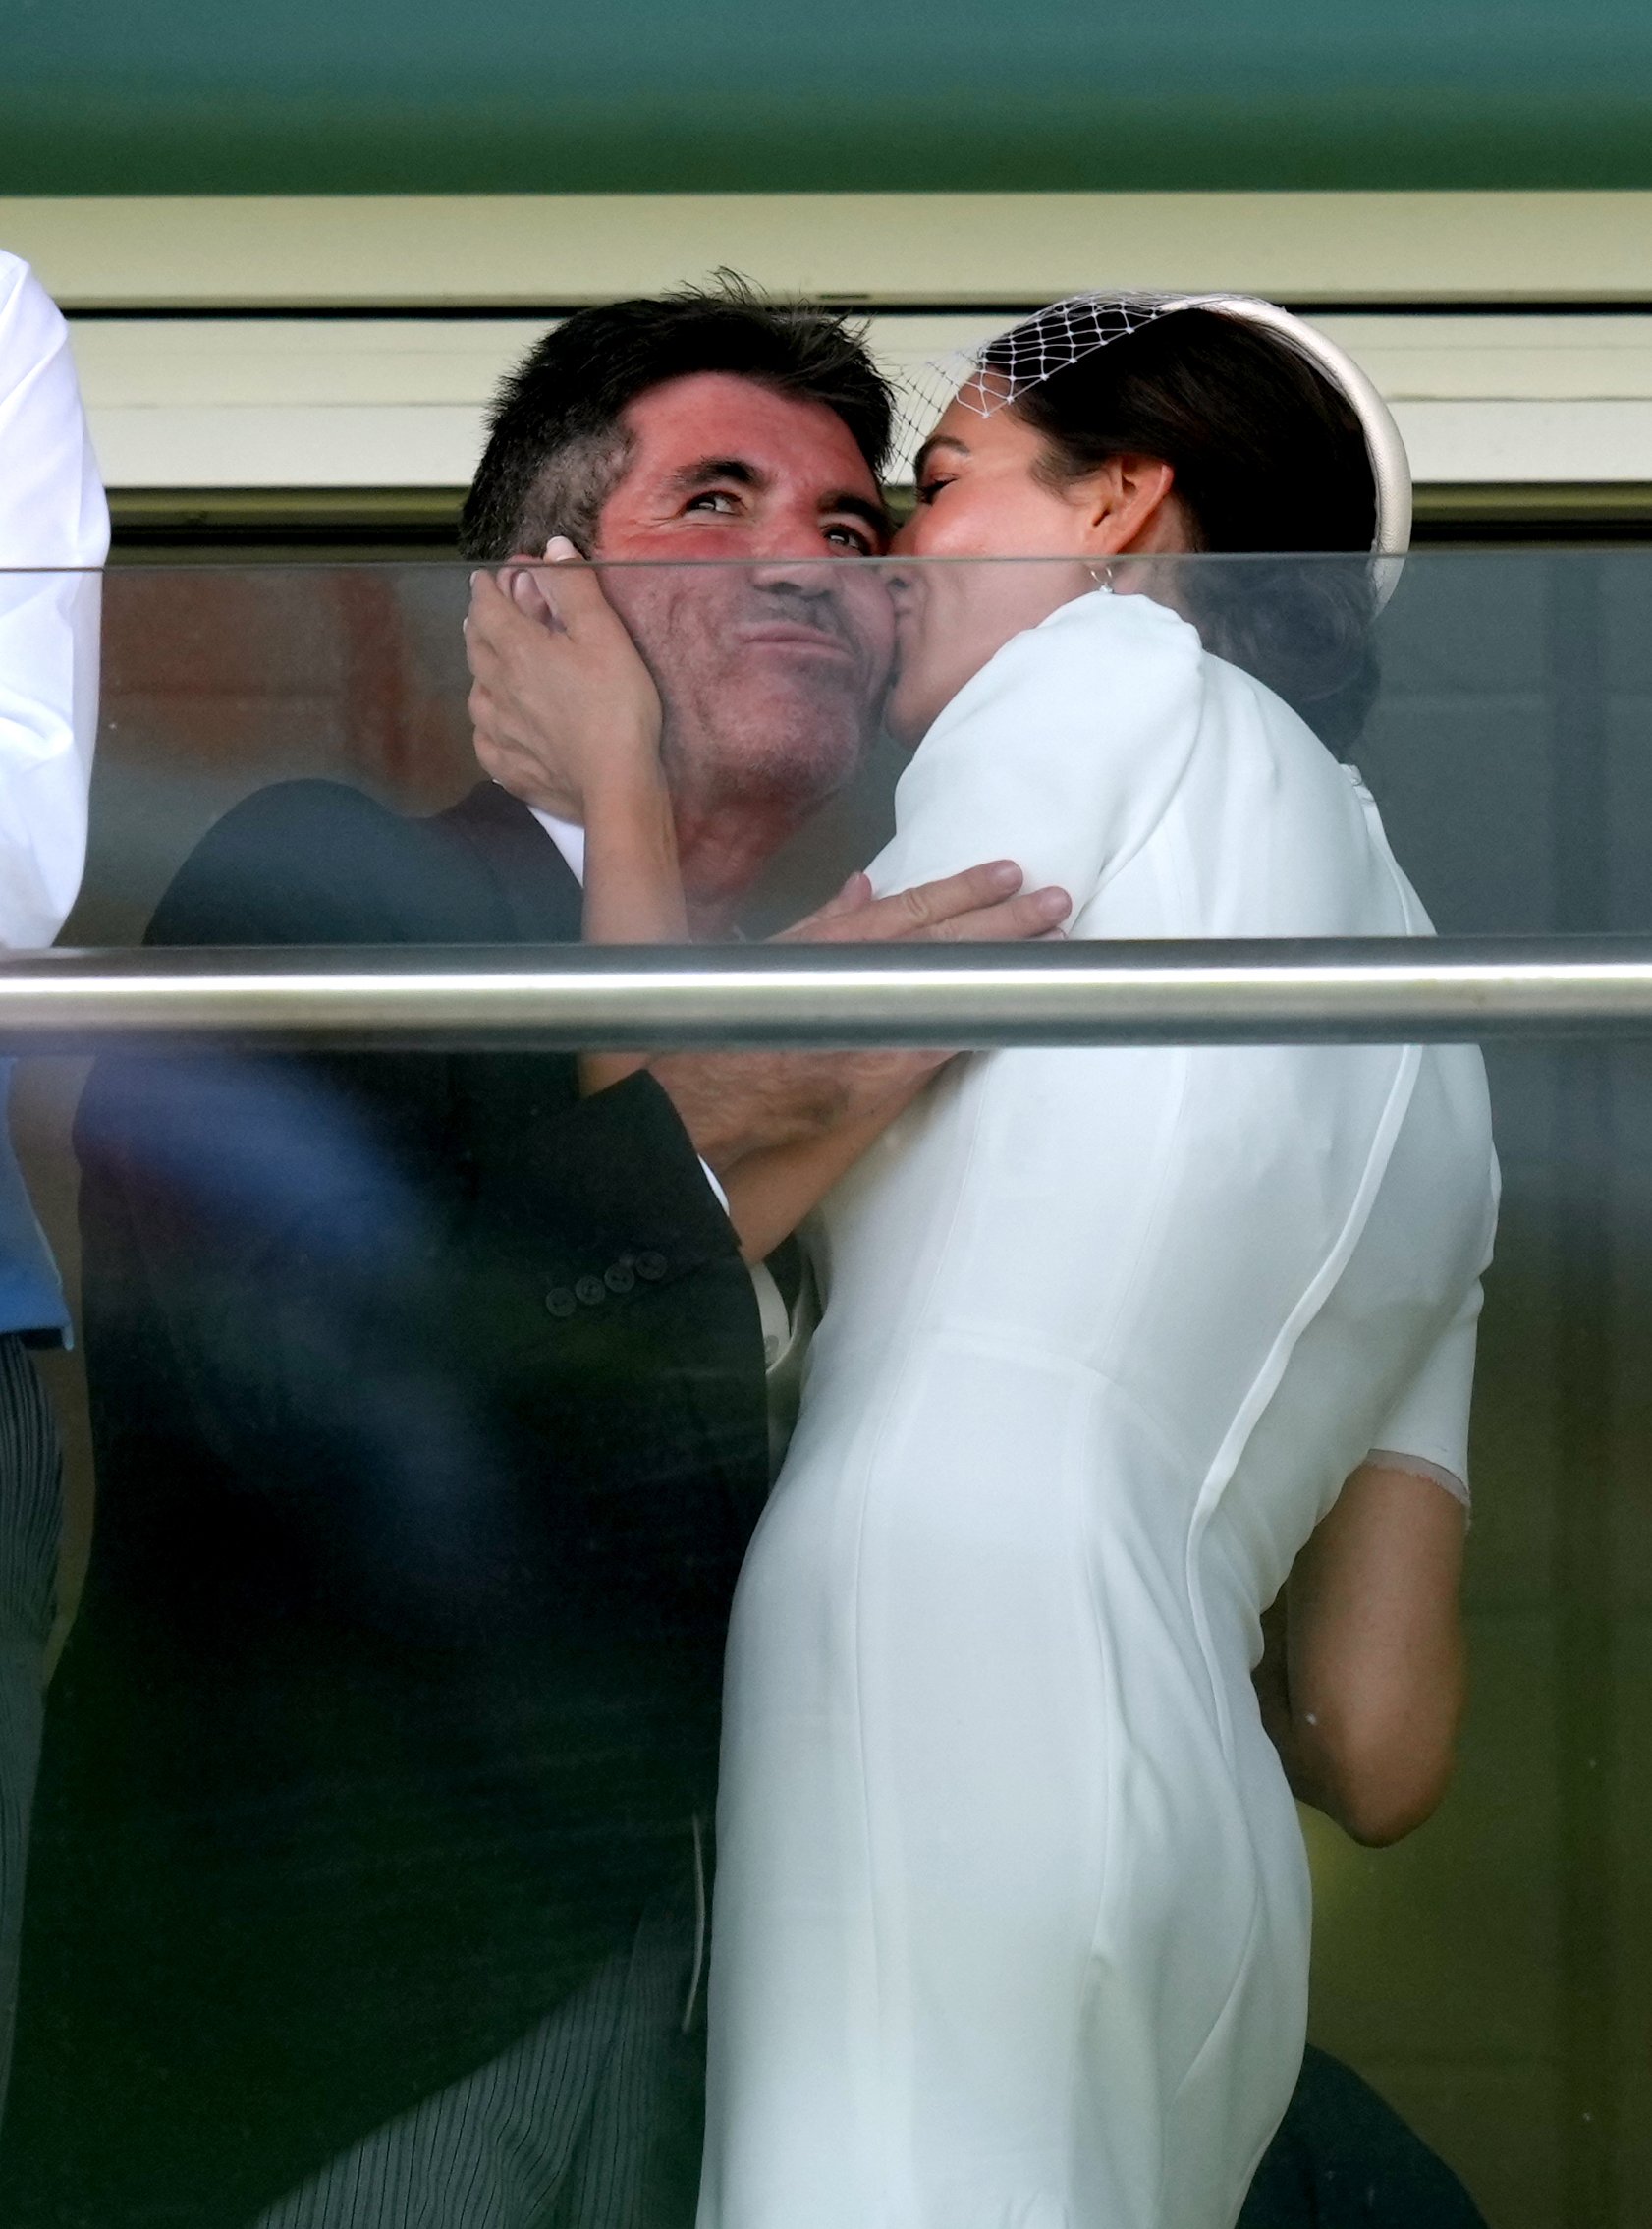 Simon Cowell and Lauren Silverman during the Cazoo Derby Festival on June 5, 2021, in Epsom, England. | Source: Getty Images